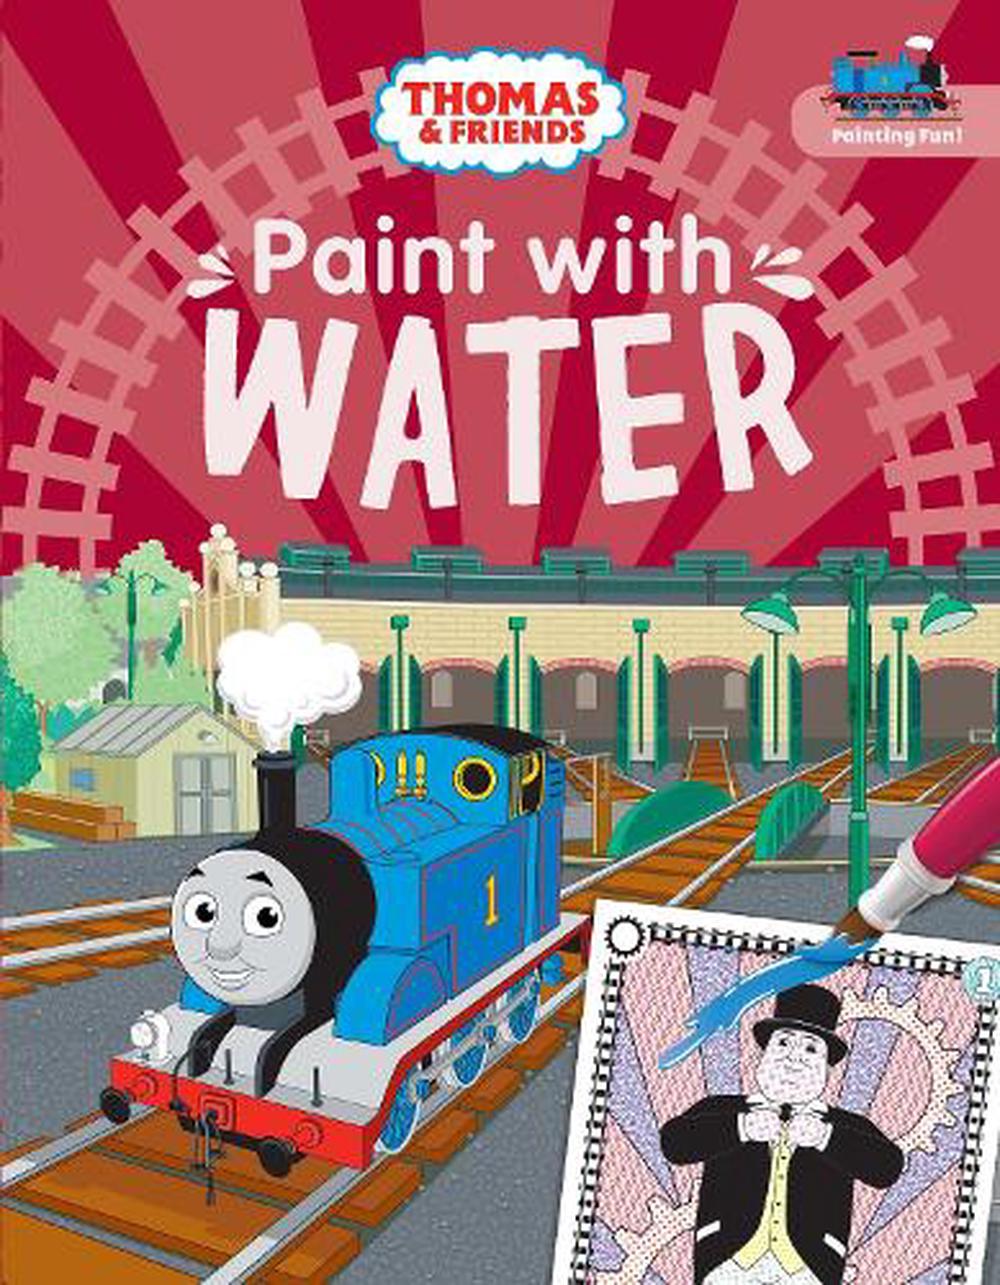 Thomas & Friends Paint with Water Paperback Book Free Shipping! | eBay